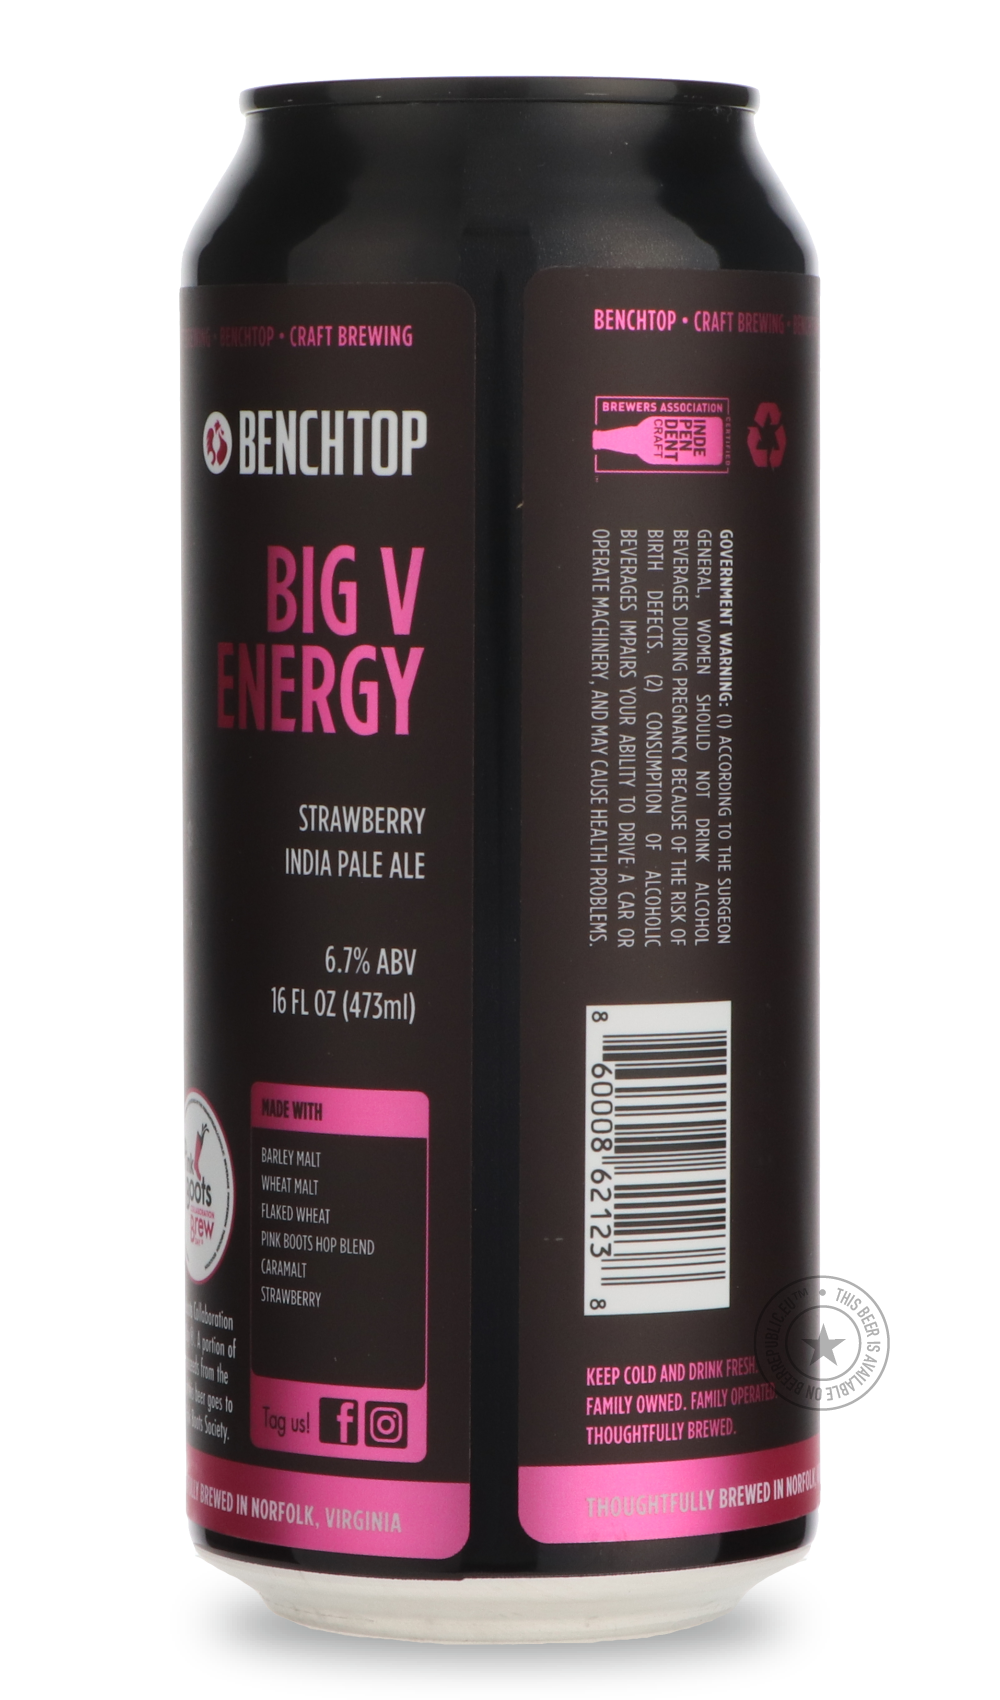 -Benchtop- Big V Energy-IPA- Only @ Beer Republic - The best online beer store for American & Canadian craft beer - Buy beer online from the USA and Canada - Bier online kopen - Amerikaans bier kopen - Craft beer store - Craft beer kopen - Amerikanisch bier kaufen - Bier online kaufen - Acheter biere online - IPA - Stout - Porter - New England IPA - Hazy IPA - Imperial Stout - Barrel Aged - Barrel Aged Imperial Stout - Brown - Dark beer - Blond - Blonde - Pilsner - Lager - Wheat - Weizen - Amber - Barley Wi